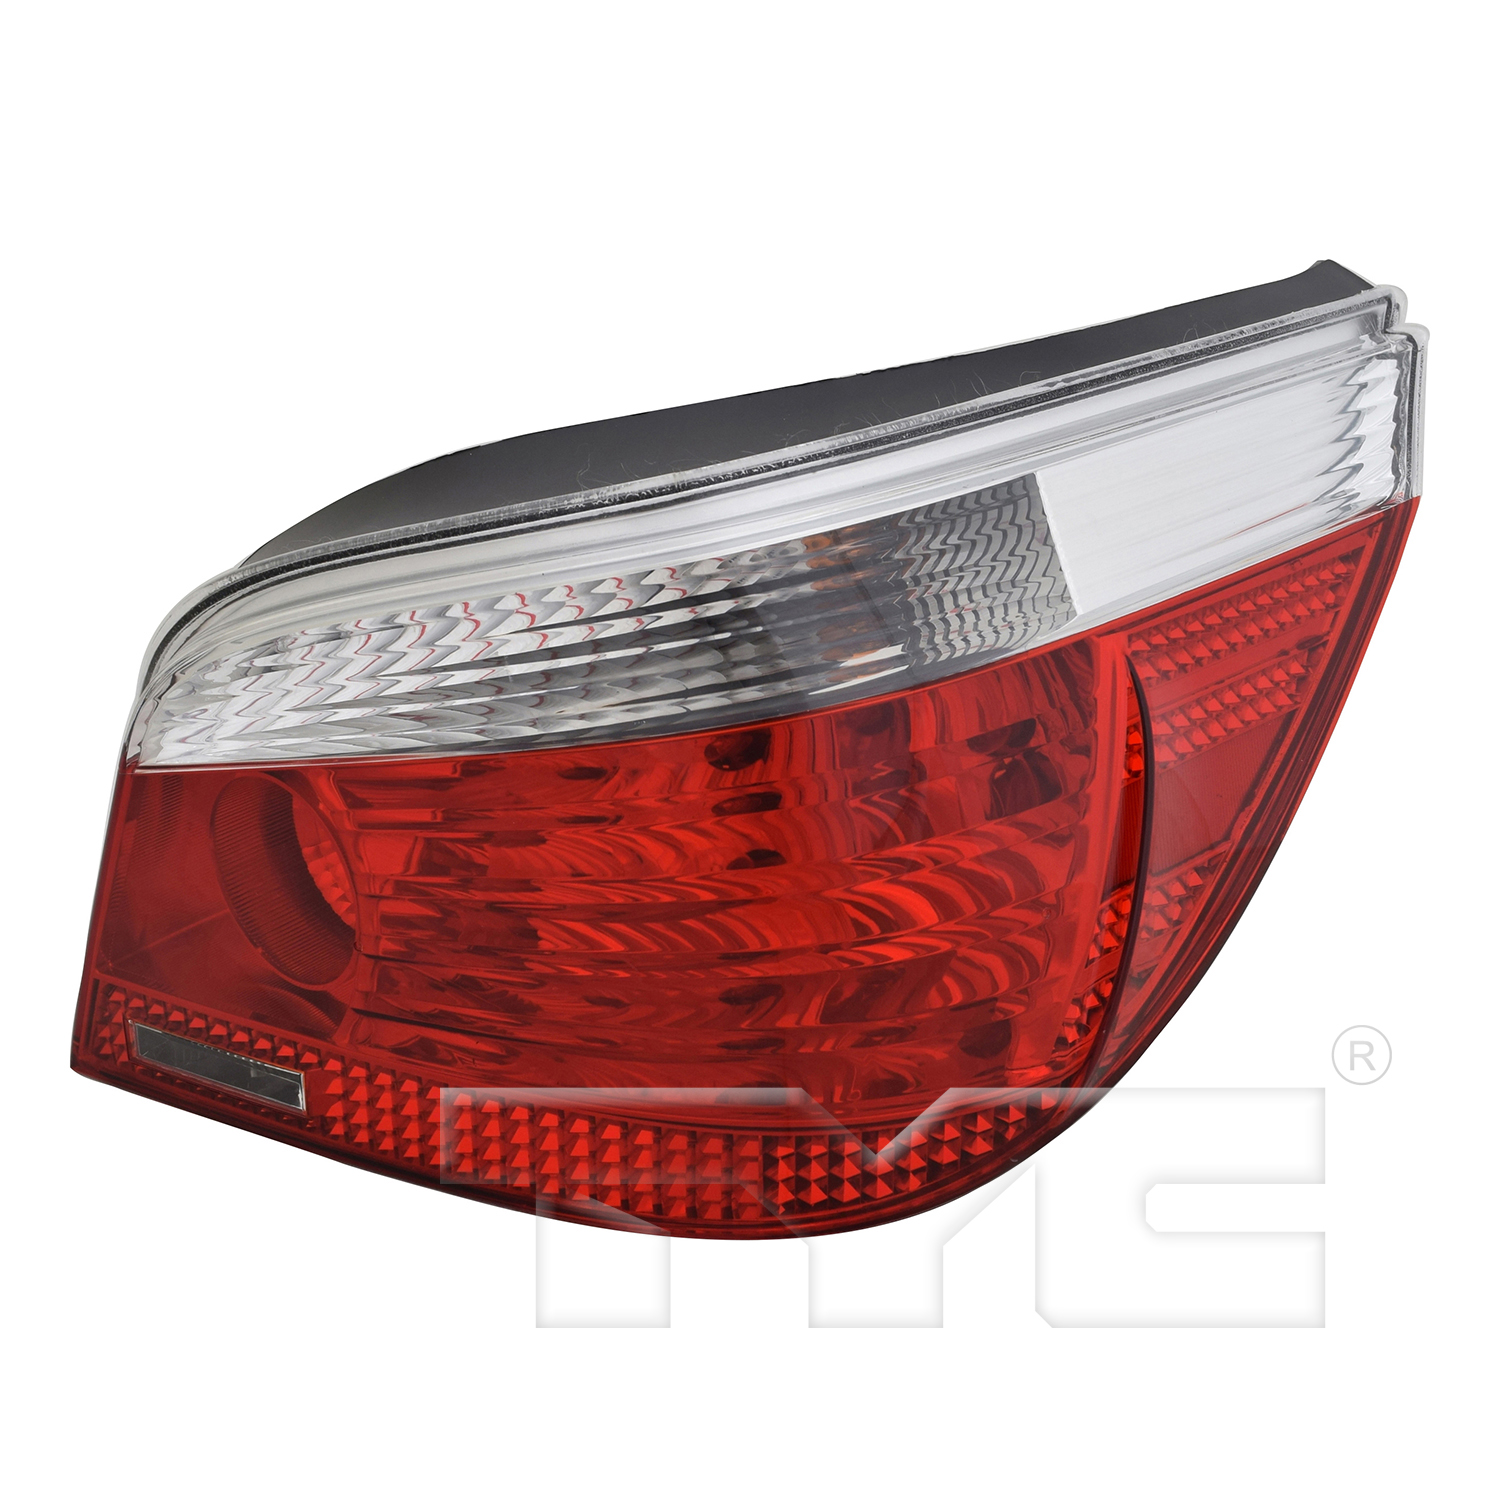 Aftermarket TAILLIGHTS for BMW - 525I, 525i,04-07,RT Taillamp assy